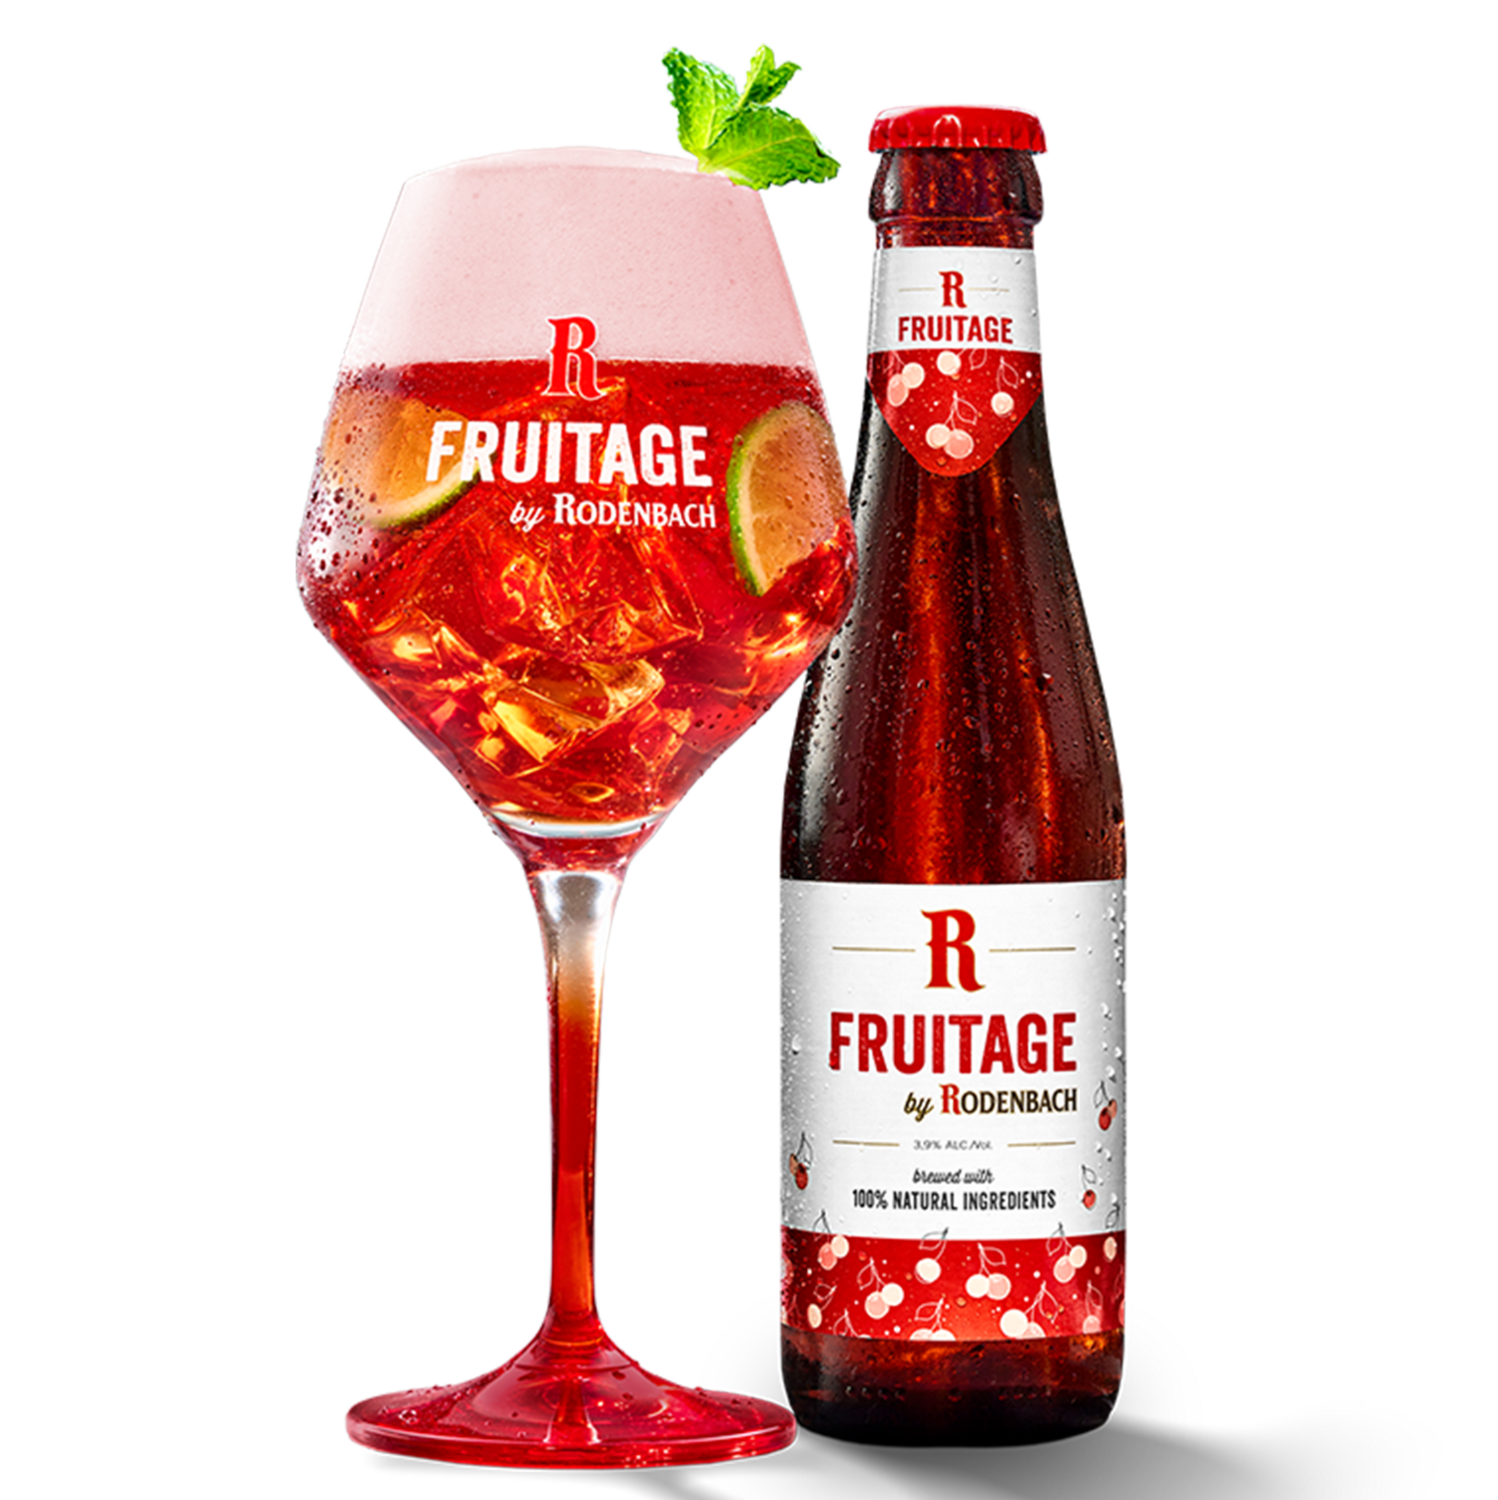 Rodenbach FruitAge Fruit Beer